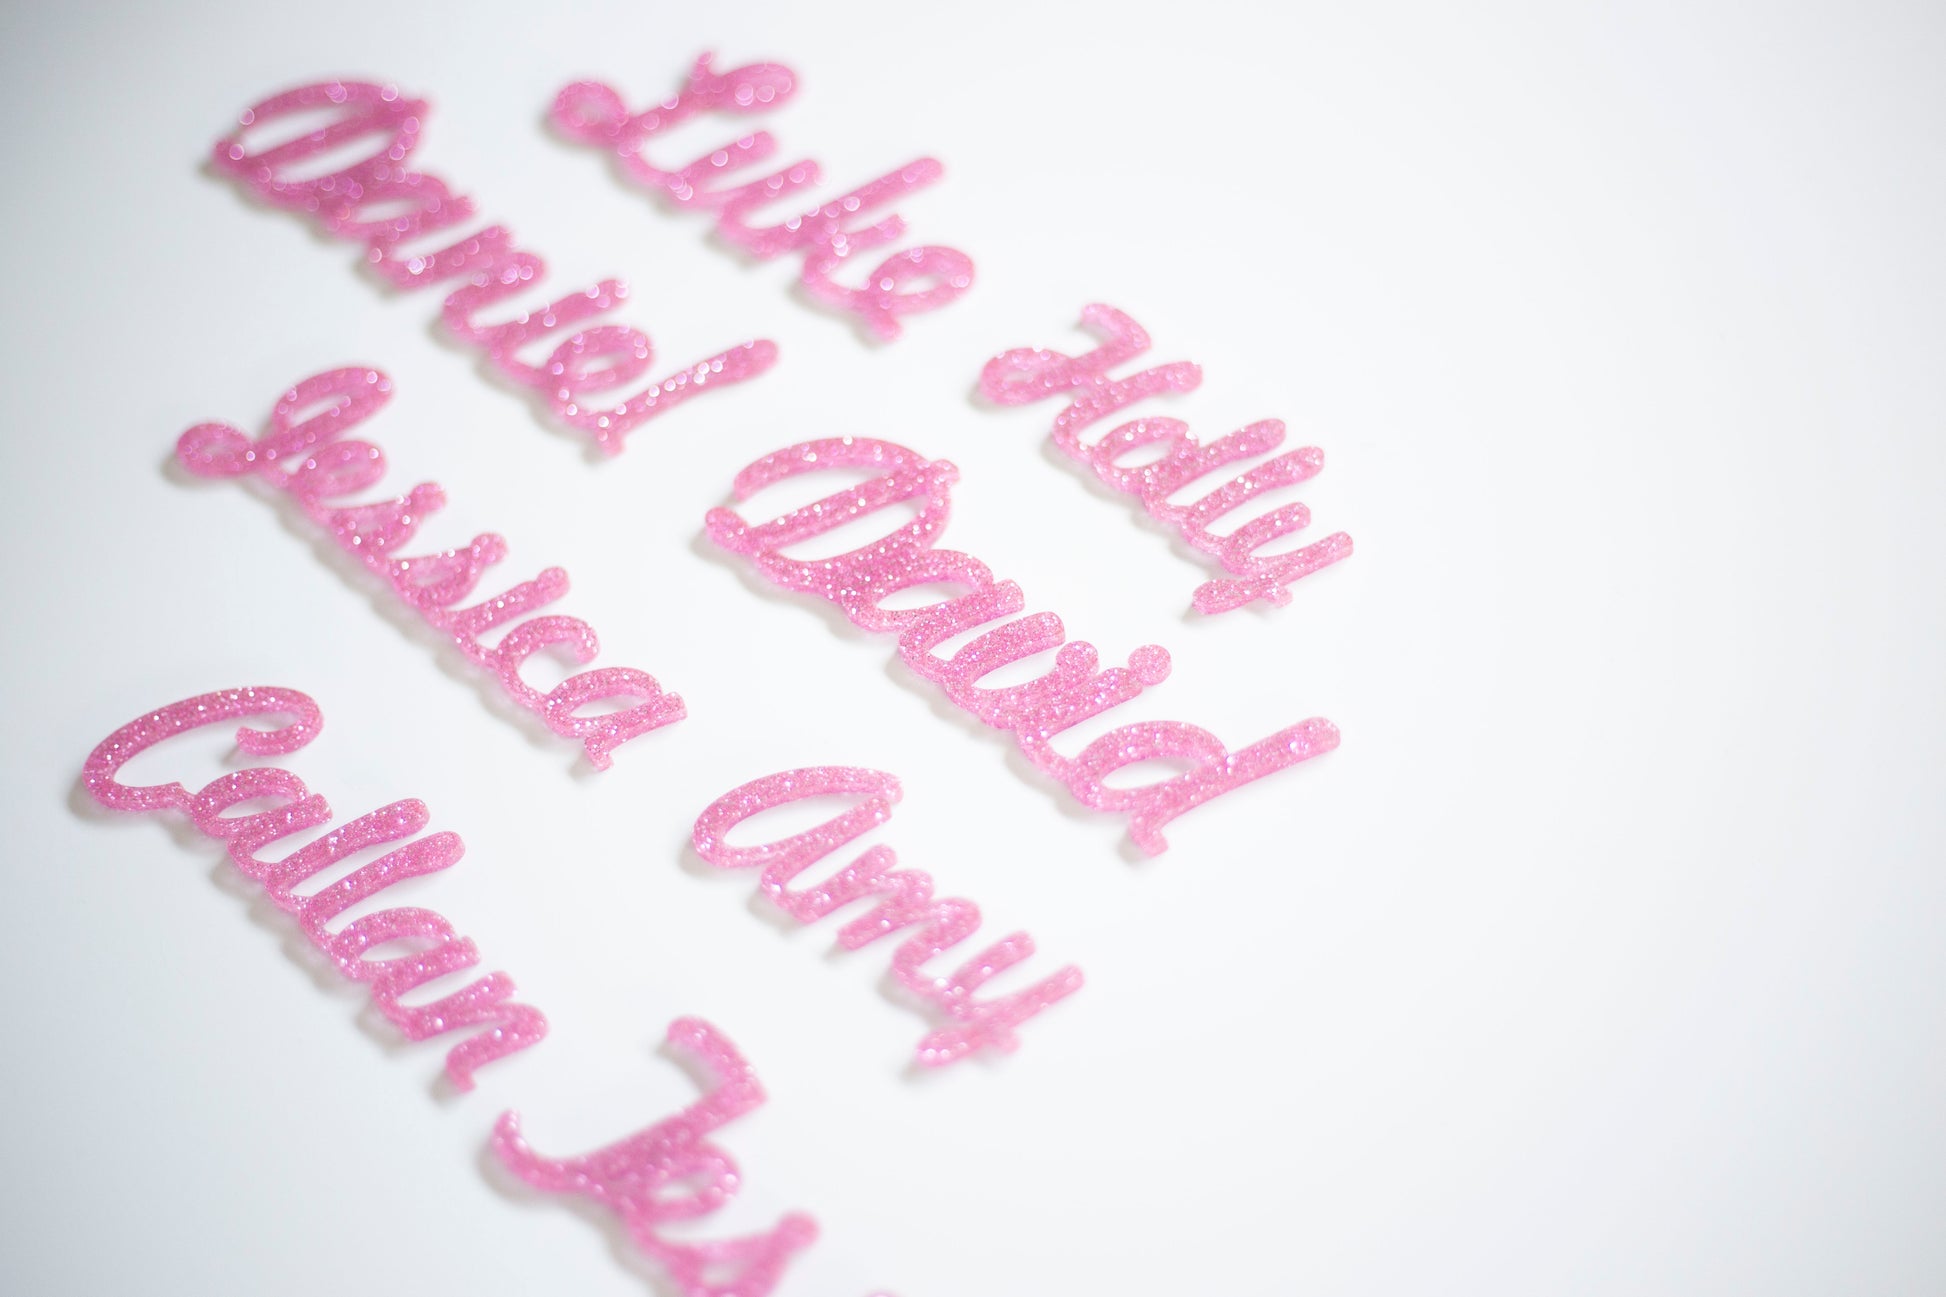 Pink Glitter Acrylic Name Plates bolton creations